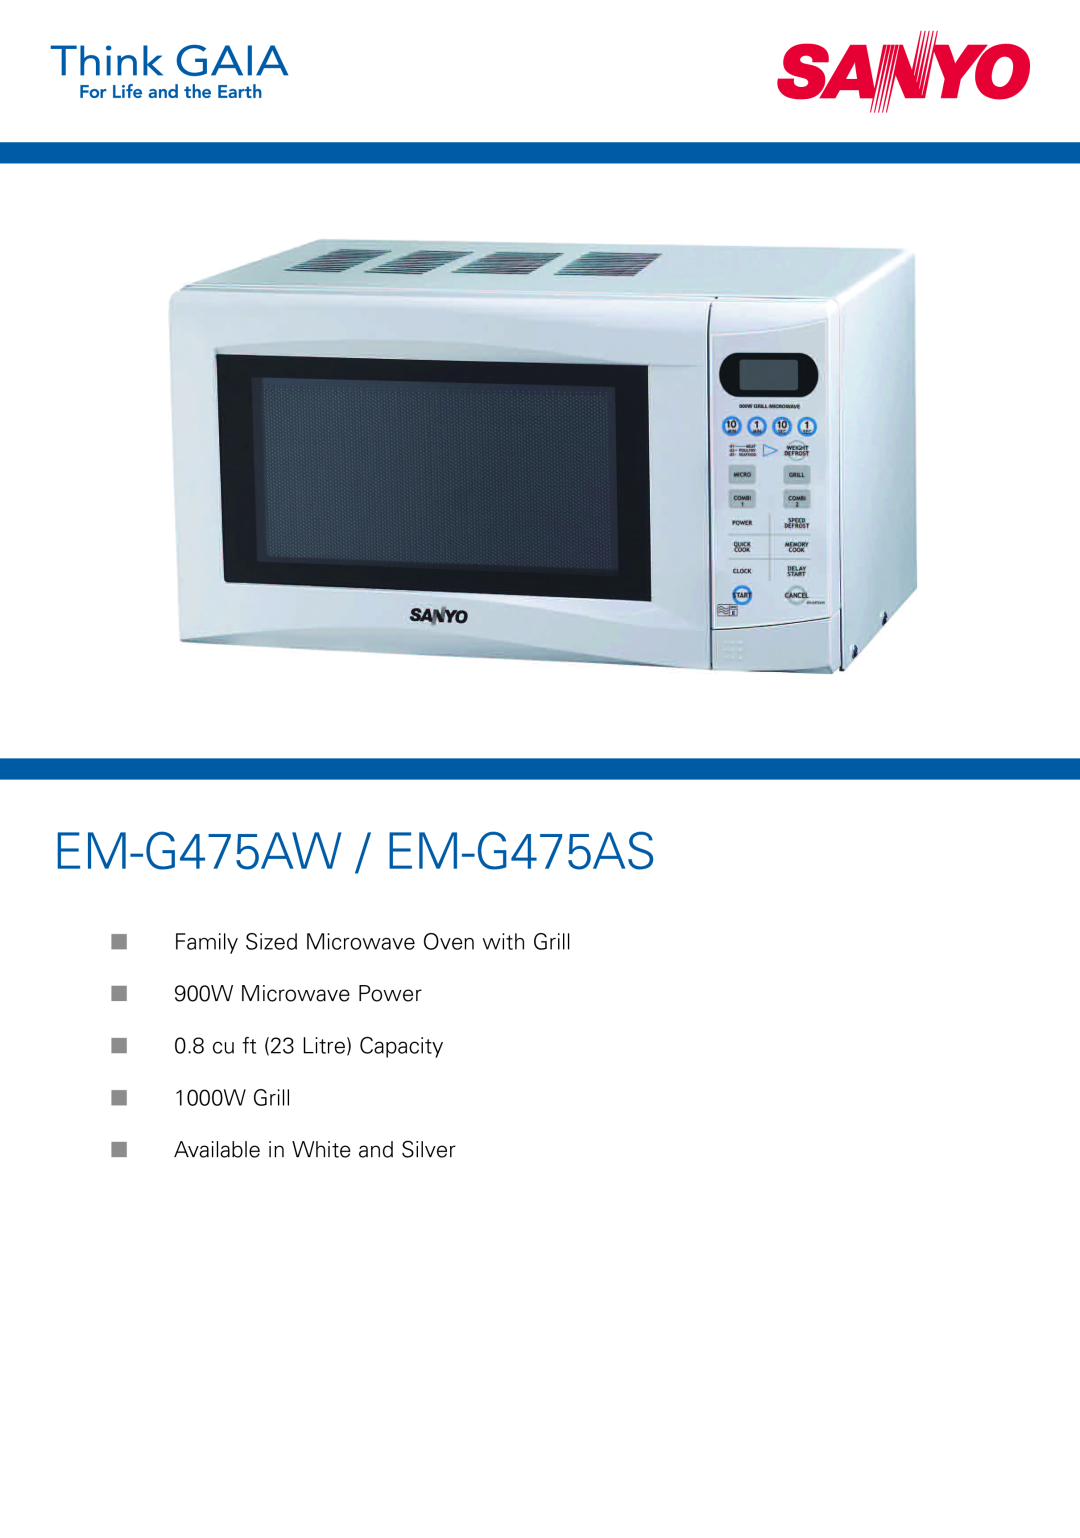 Sanyo manual EM-G475AW / EM-G475AS, Family Sized Microwave Oven with Grill, 1000W Grill Available in White and Silver 